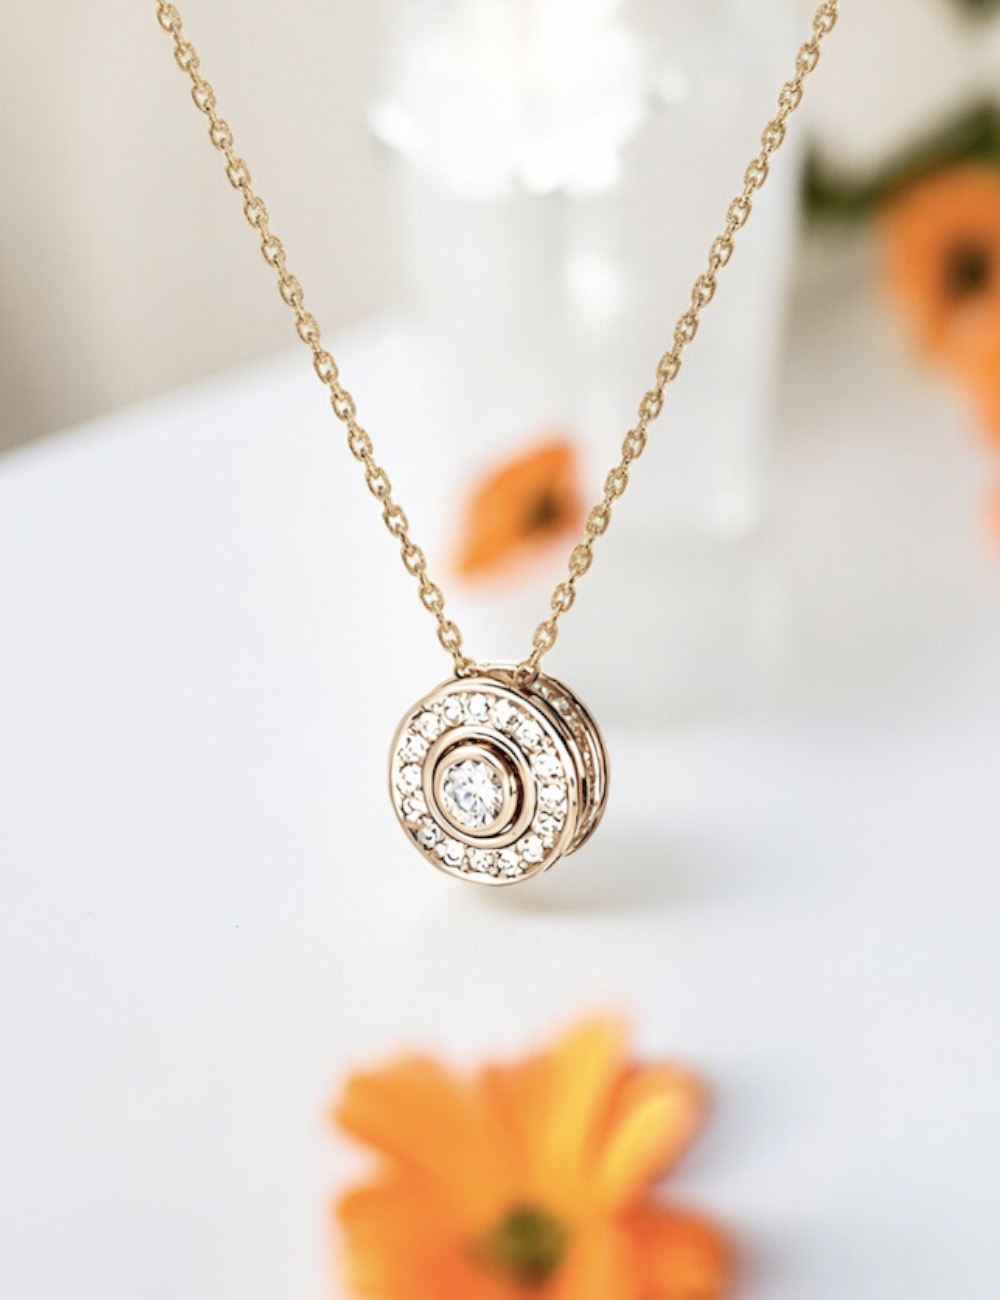 D.Bachet's Life Necklace: Central 0.20ct white diamond with halo & life flower design.